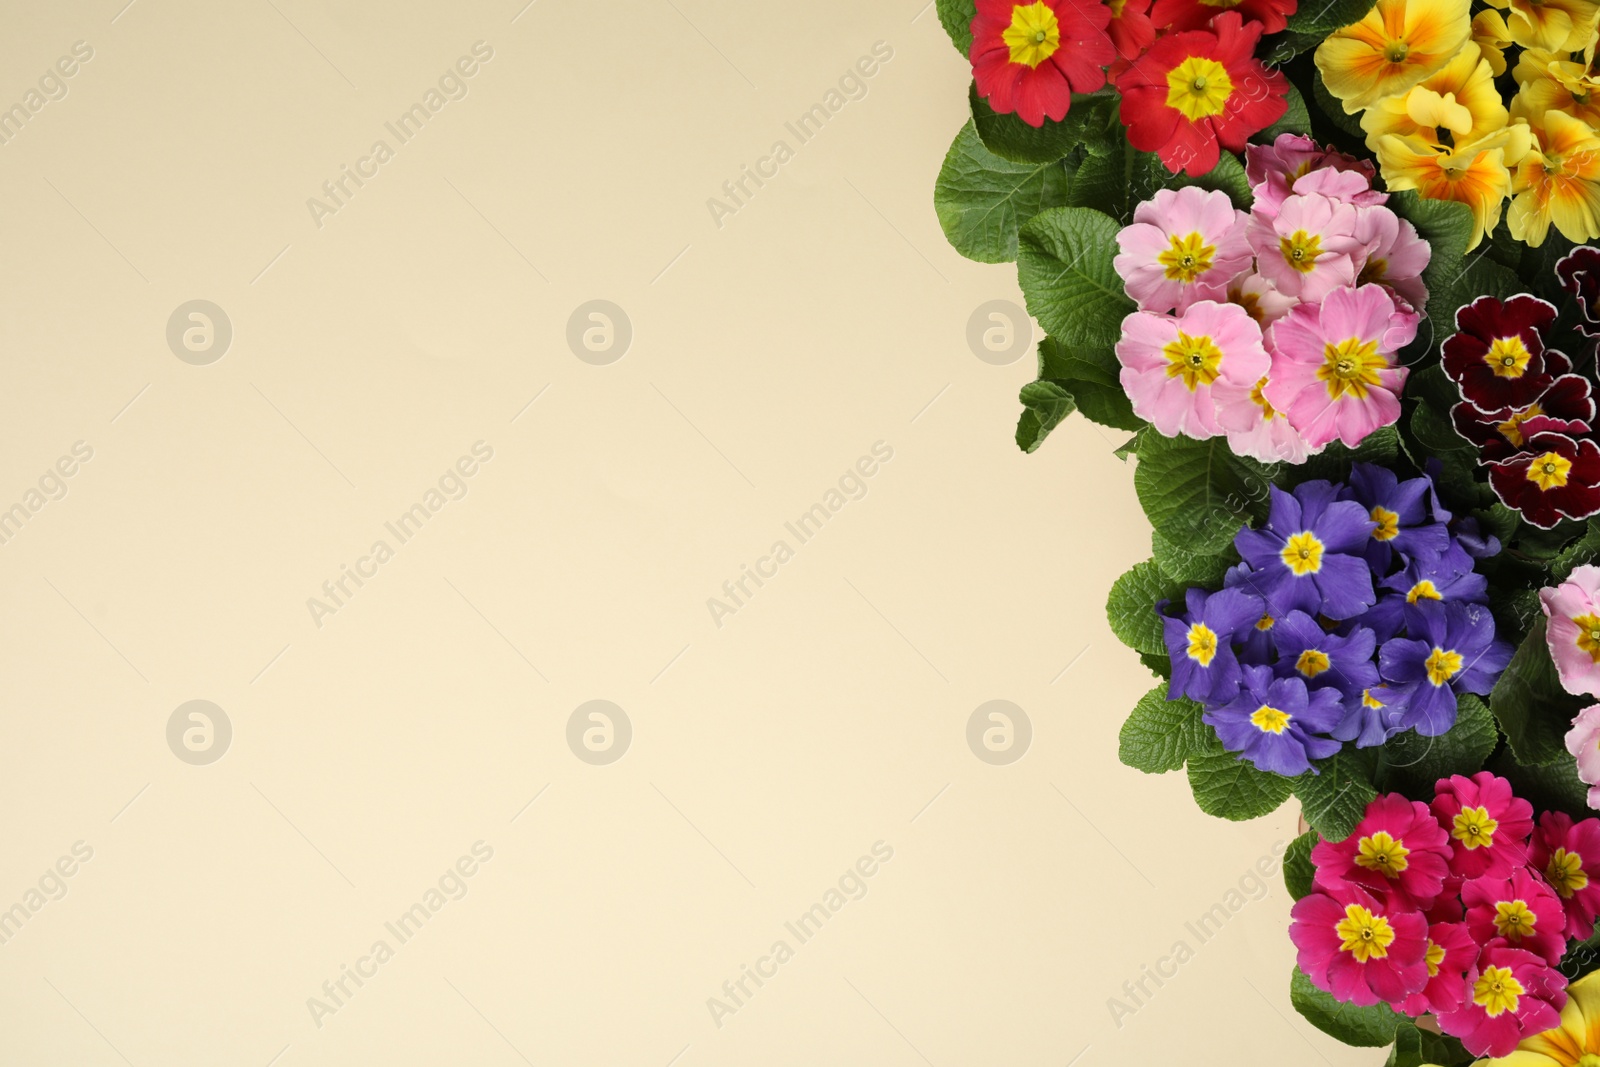 Photo of Primrose Primula Vulgaris flowers on beige background, flat lay with space for text. Spring season